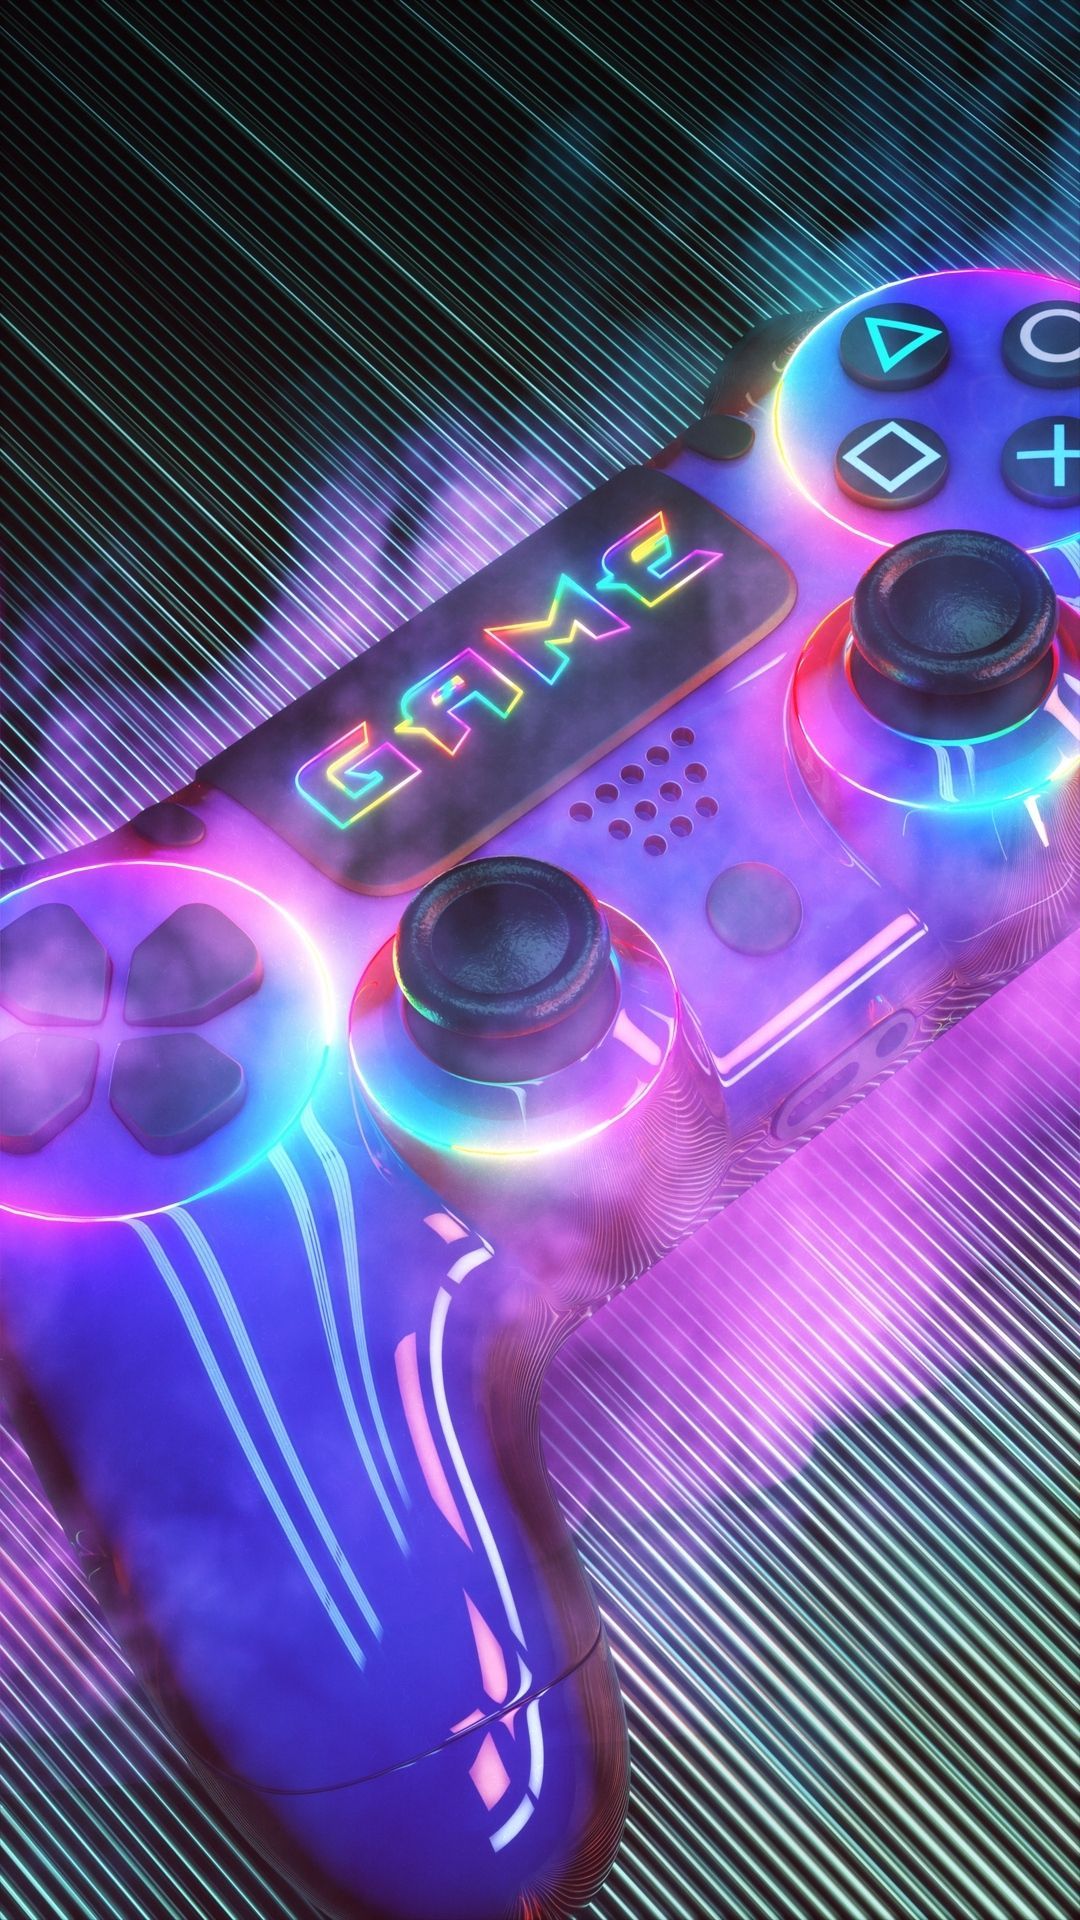 game. controller. iphone x. wallpaper. Best gaming wallpaper, Gaming wallpaper, Game wallpaper iphone